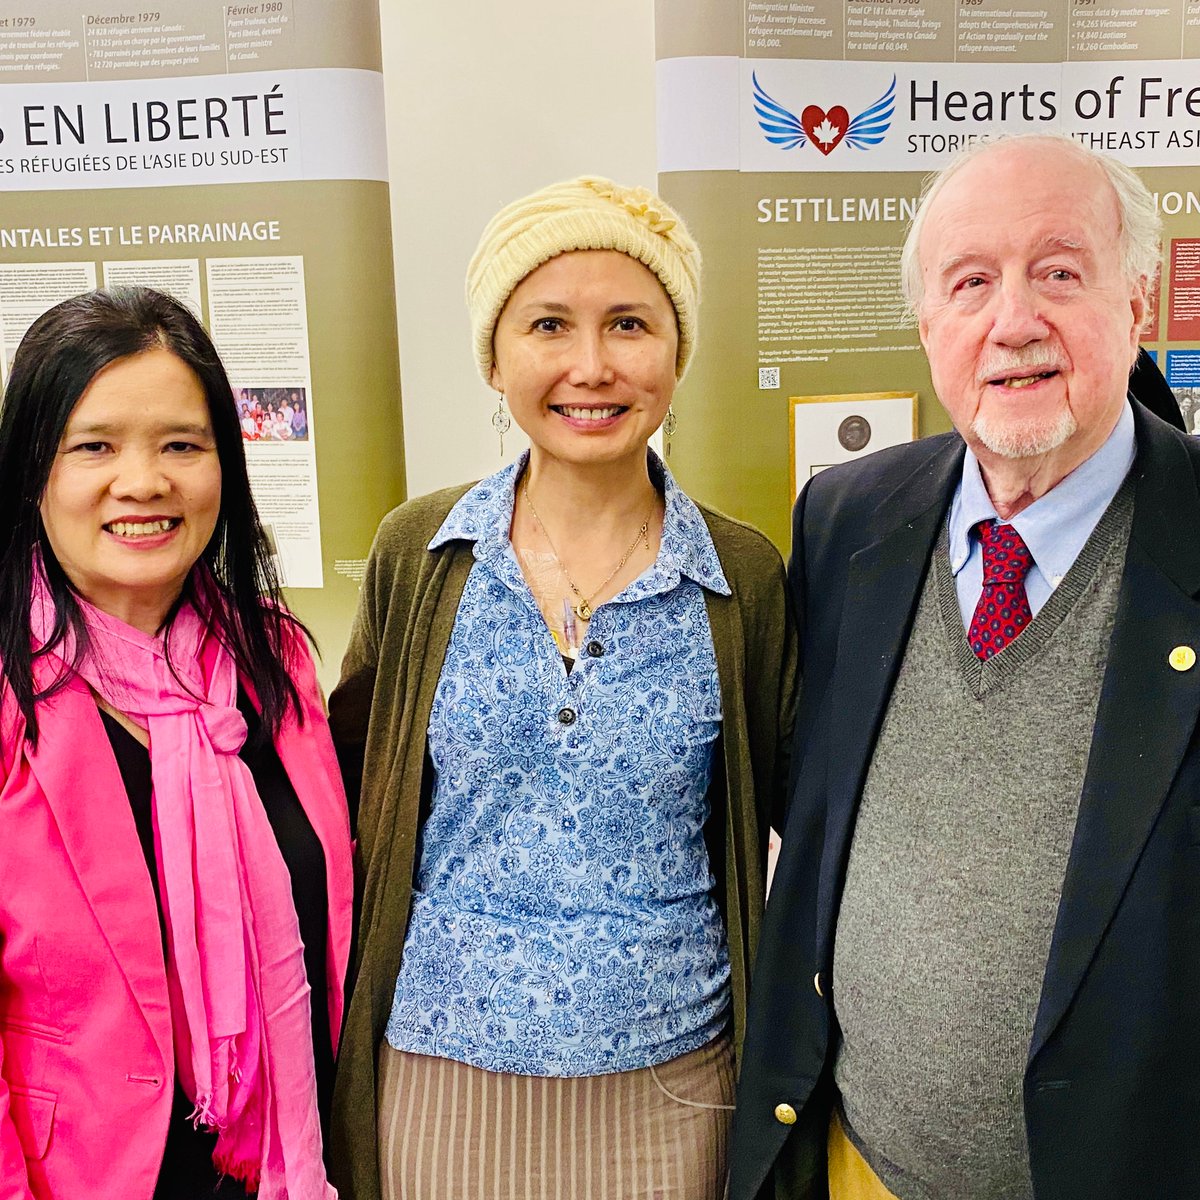 Delighted to reunite at #HeartsofFreedom exhibit #YEG w/ #MichaelMolloy, an amazing man instrumental in starting the #privatesponsorship program in Canada, that saved over 60,000 Southeast Asian refugees and gave us #PassagetoFreedom. Also lovely meeting curator #StephanieStobbe.